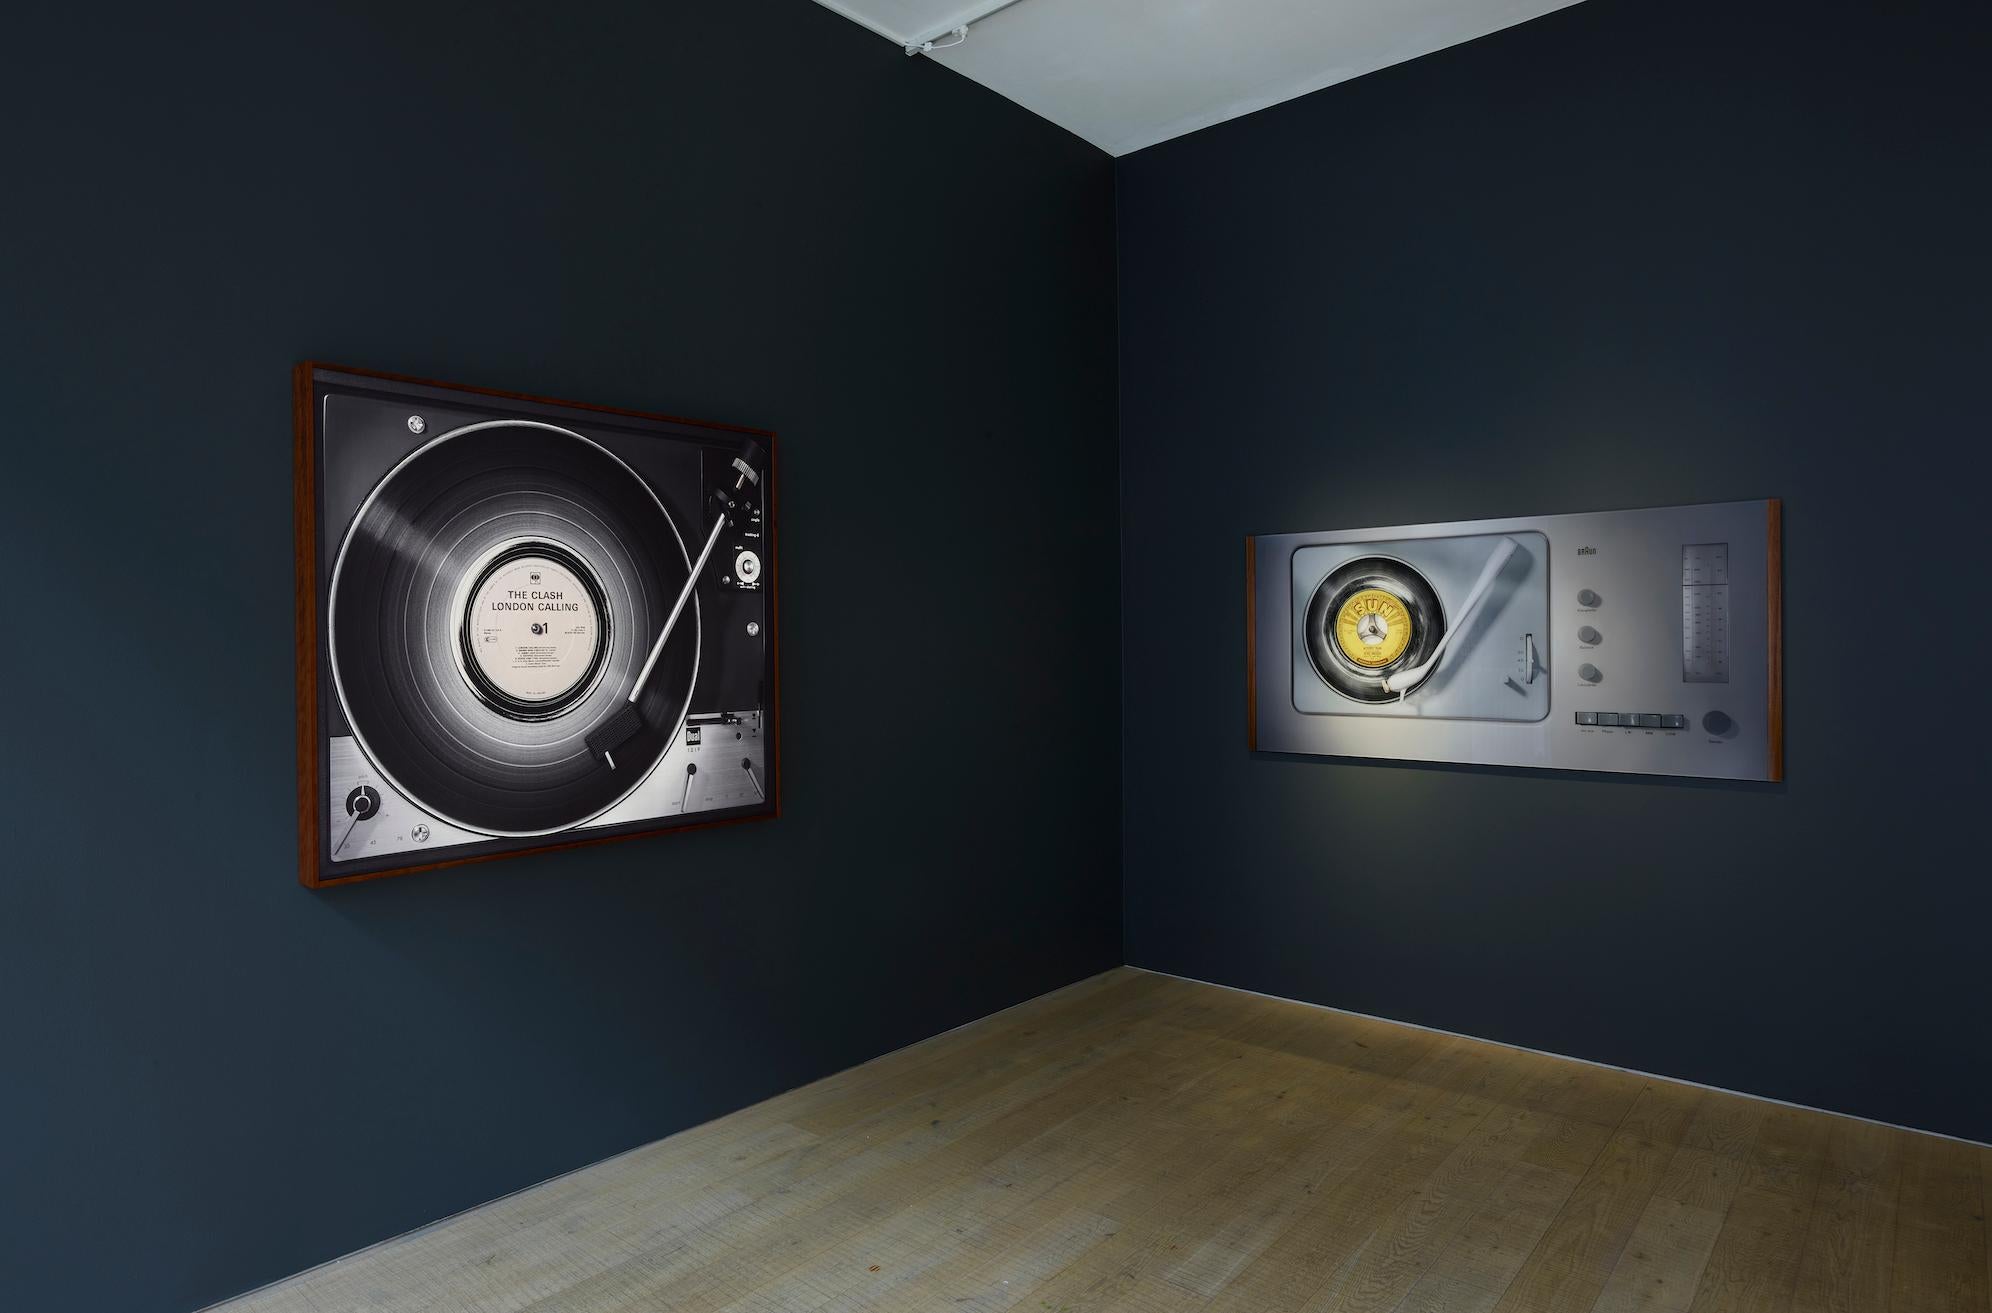 Edition of 3
Mounted in Plexiglas

Kai Schäfer is an acclaimed German photographer with a passion for vinyl records and iconic turntables. The World Records series celebrates some of the very best and most distinctive albums in music history, each